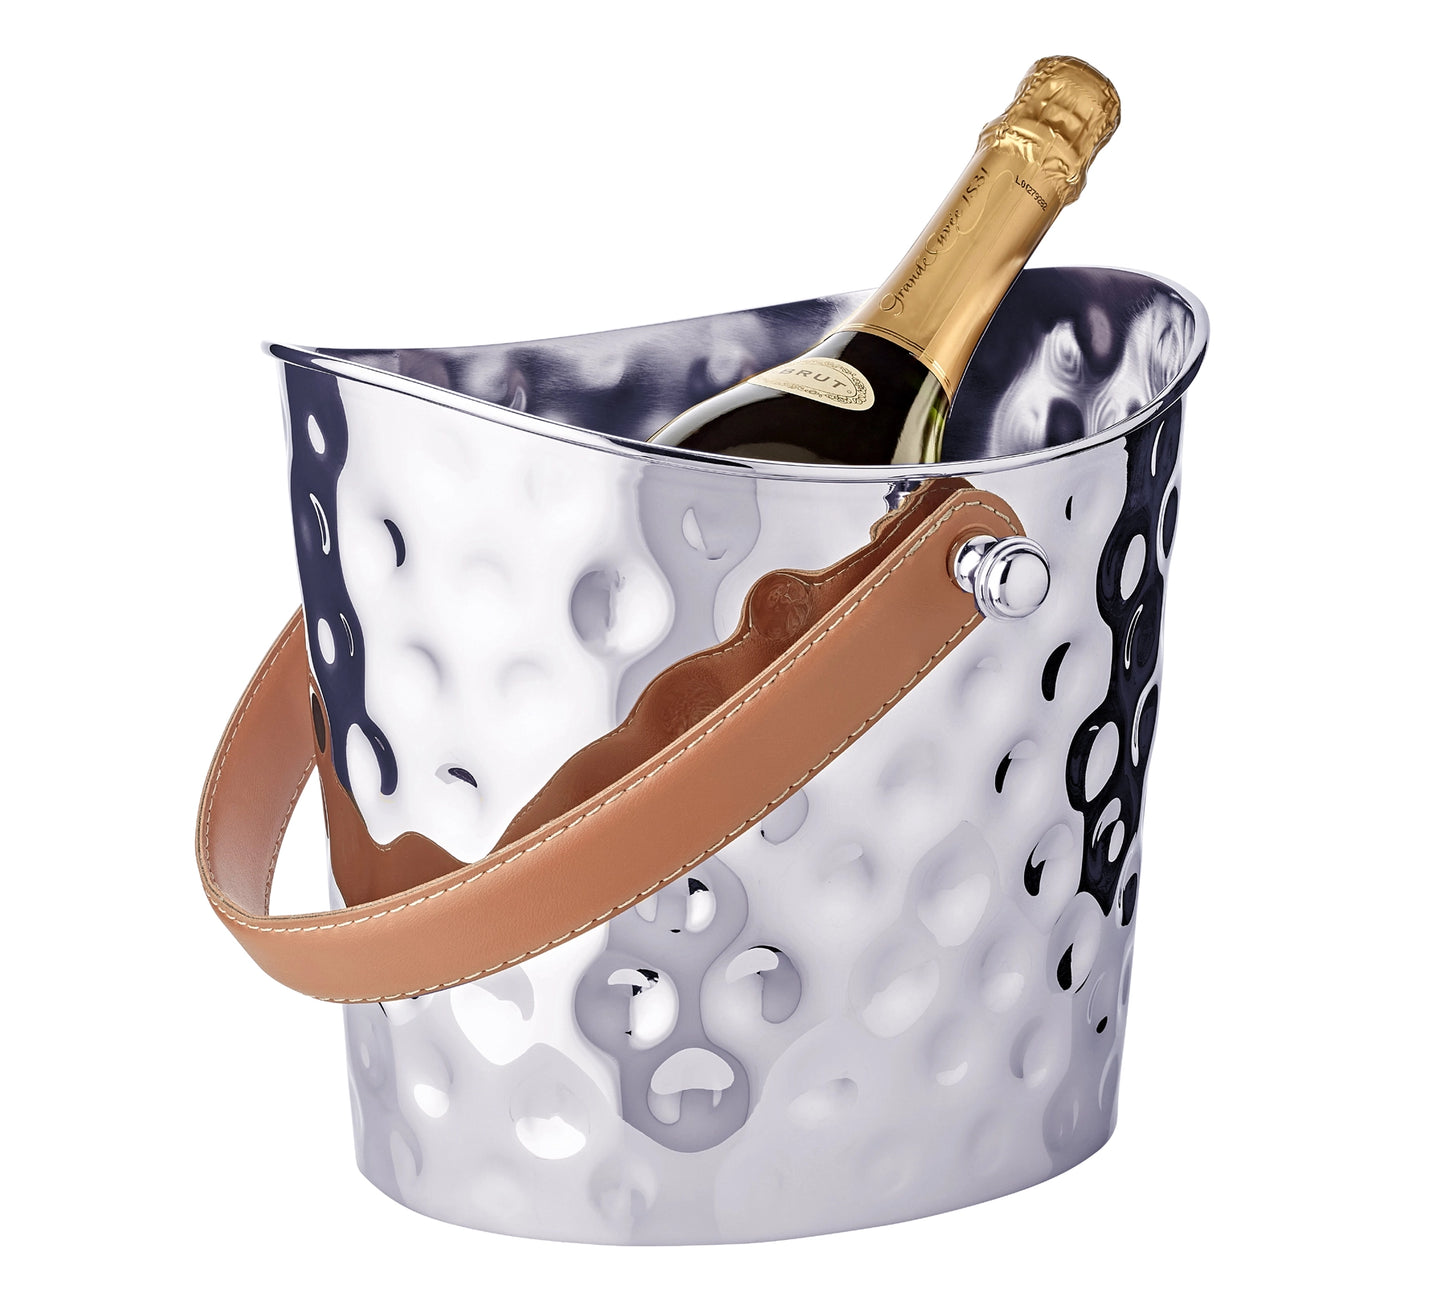 Ice bucket Gilbert wine cooler with brown leather handle large